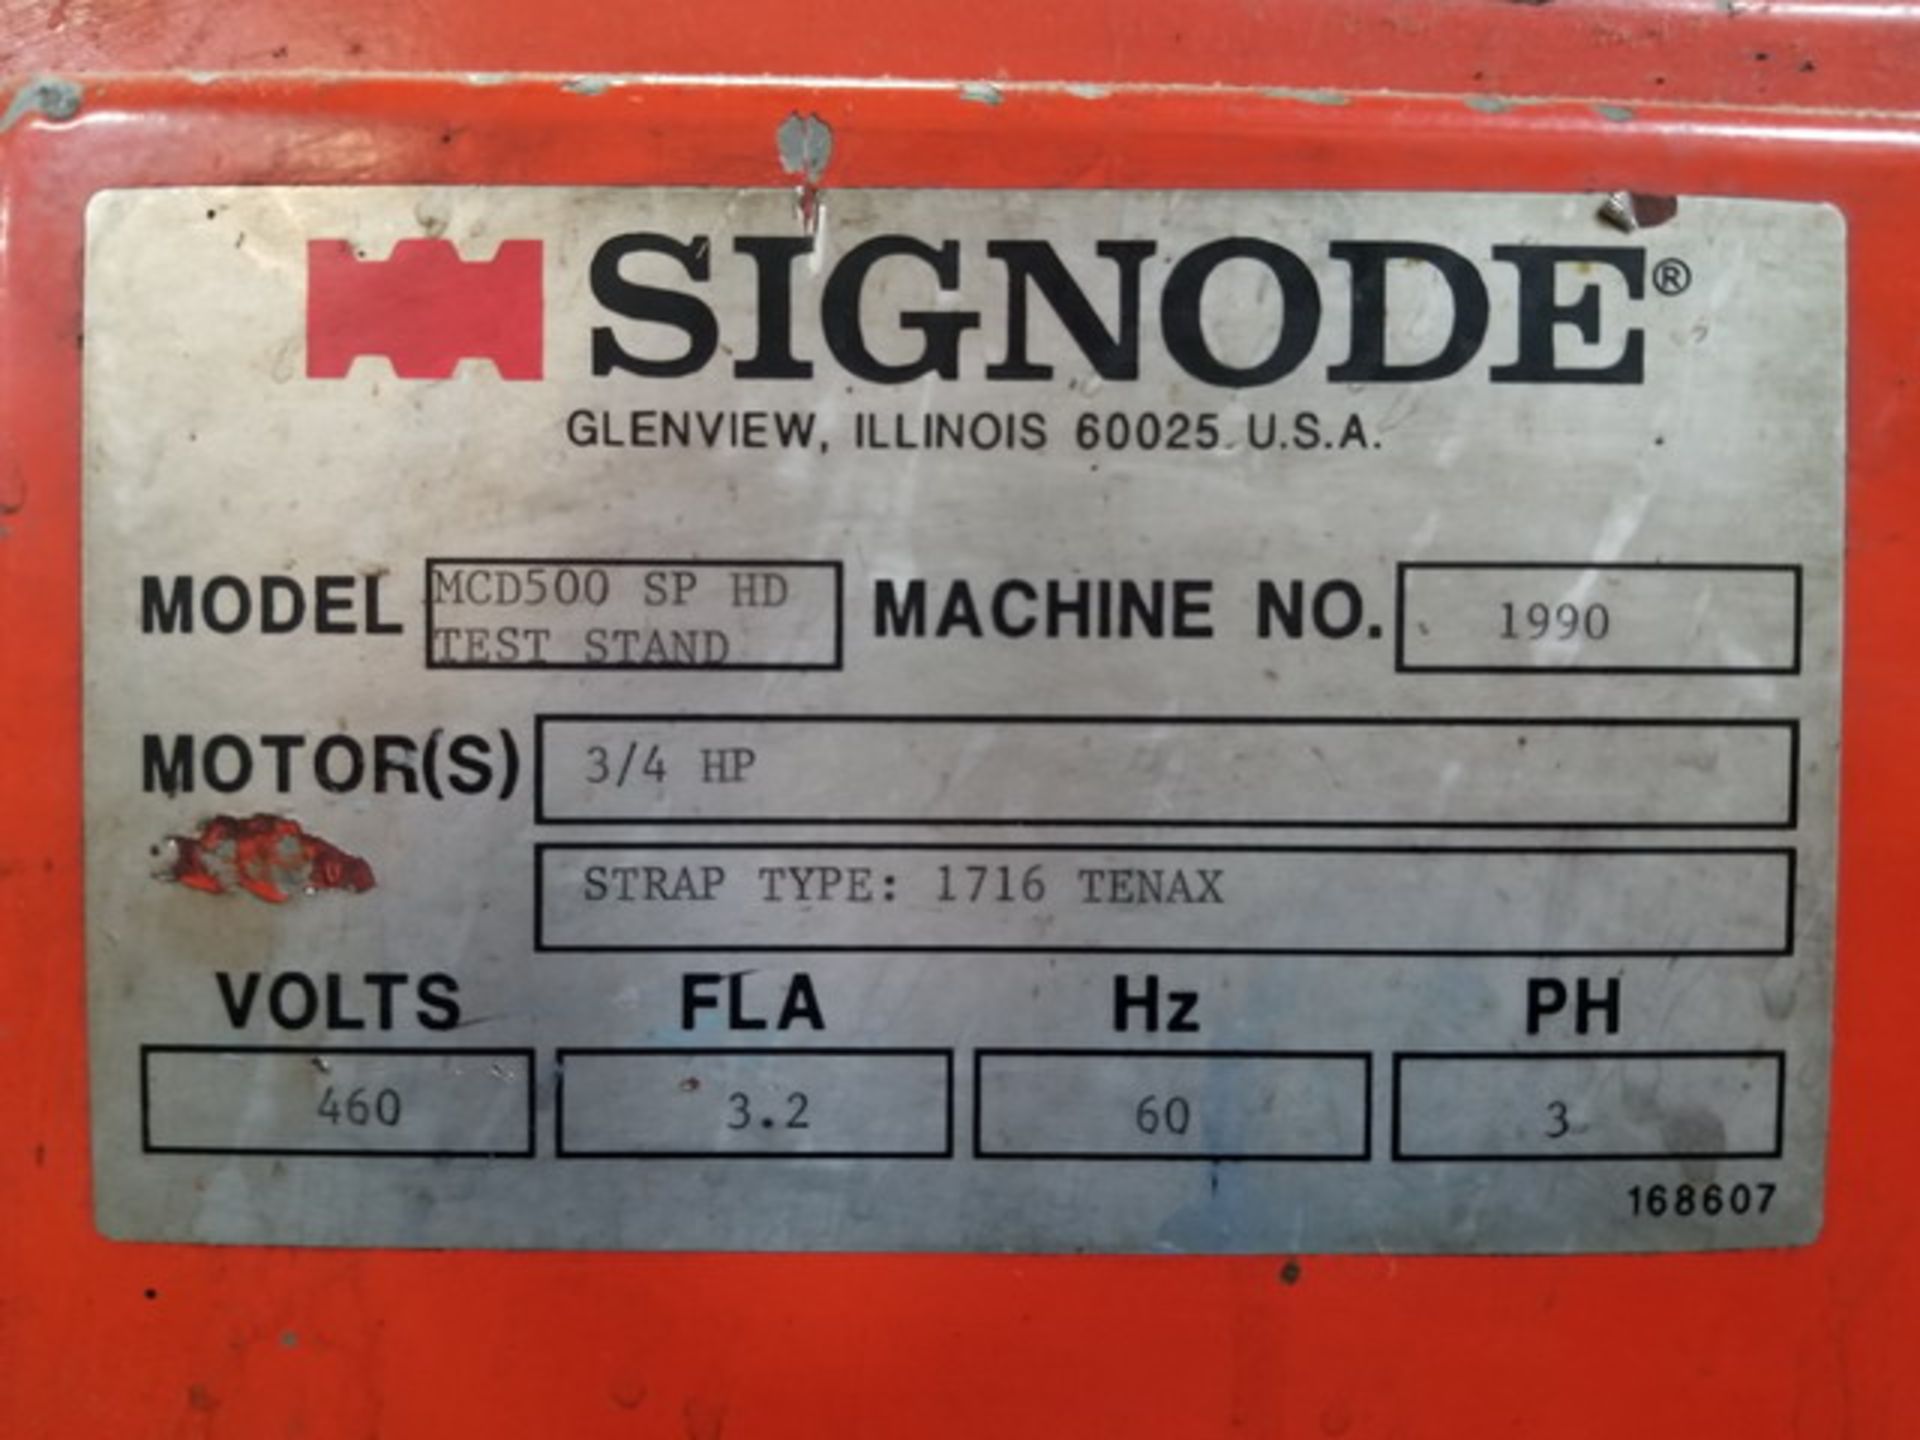 Signode Model MCD500 SP HD Test Stand; S/N: 201894; 3/4 HP; Strap Type: 1716 Tenax; 460V; 32FLA; - Image 4 of 4